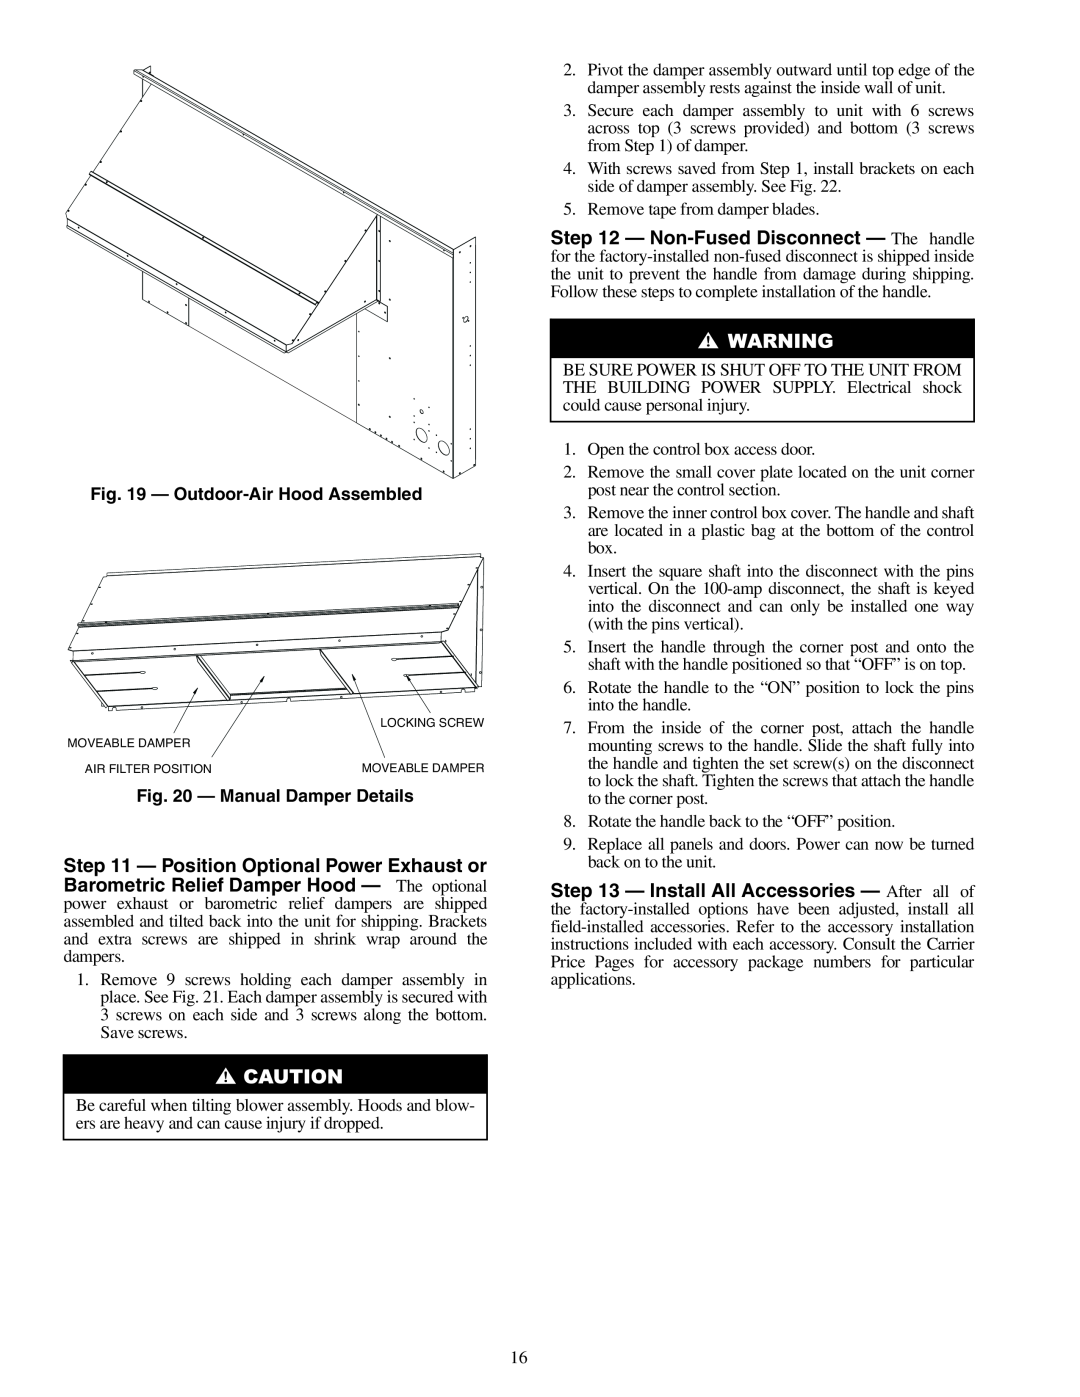 Carrier 48PG20-28 specifications Outdoor-AirHood Assembled, Manual Damper Details 